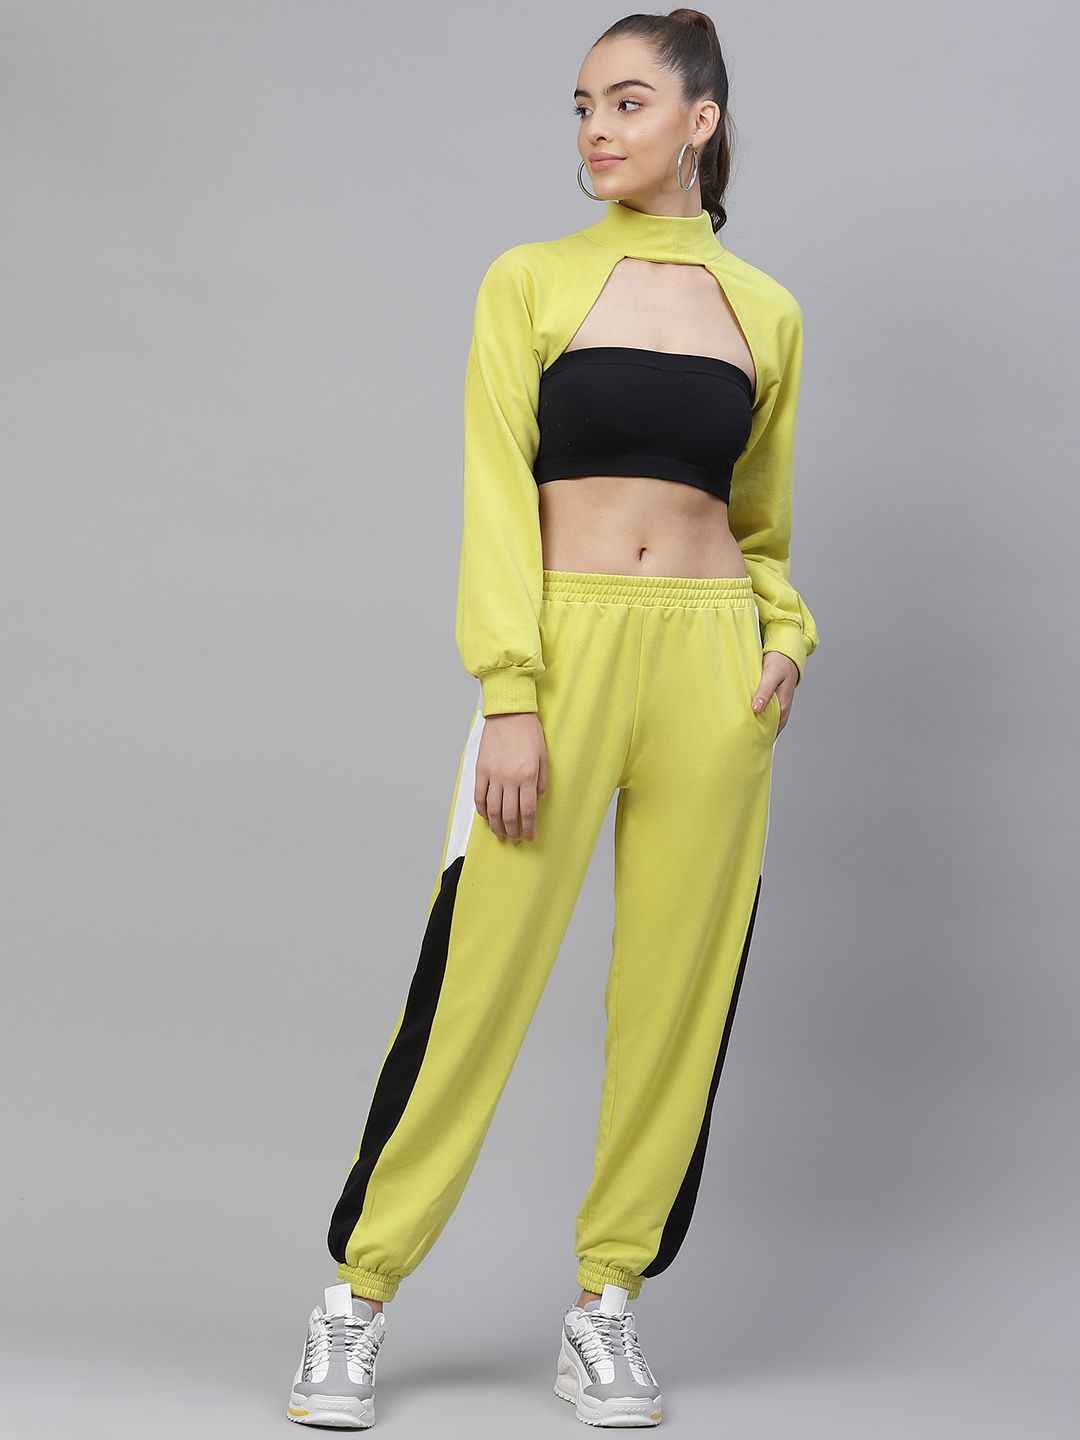 Laabha Women Yellow Solid Tracksuit With Cutout Detail Price in India